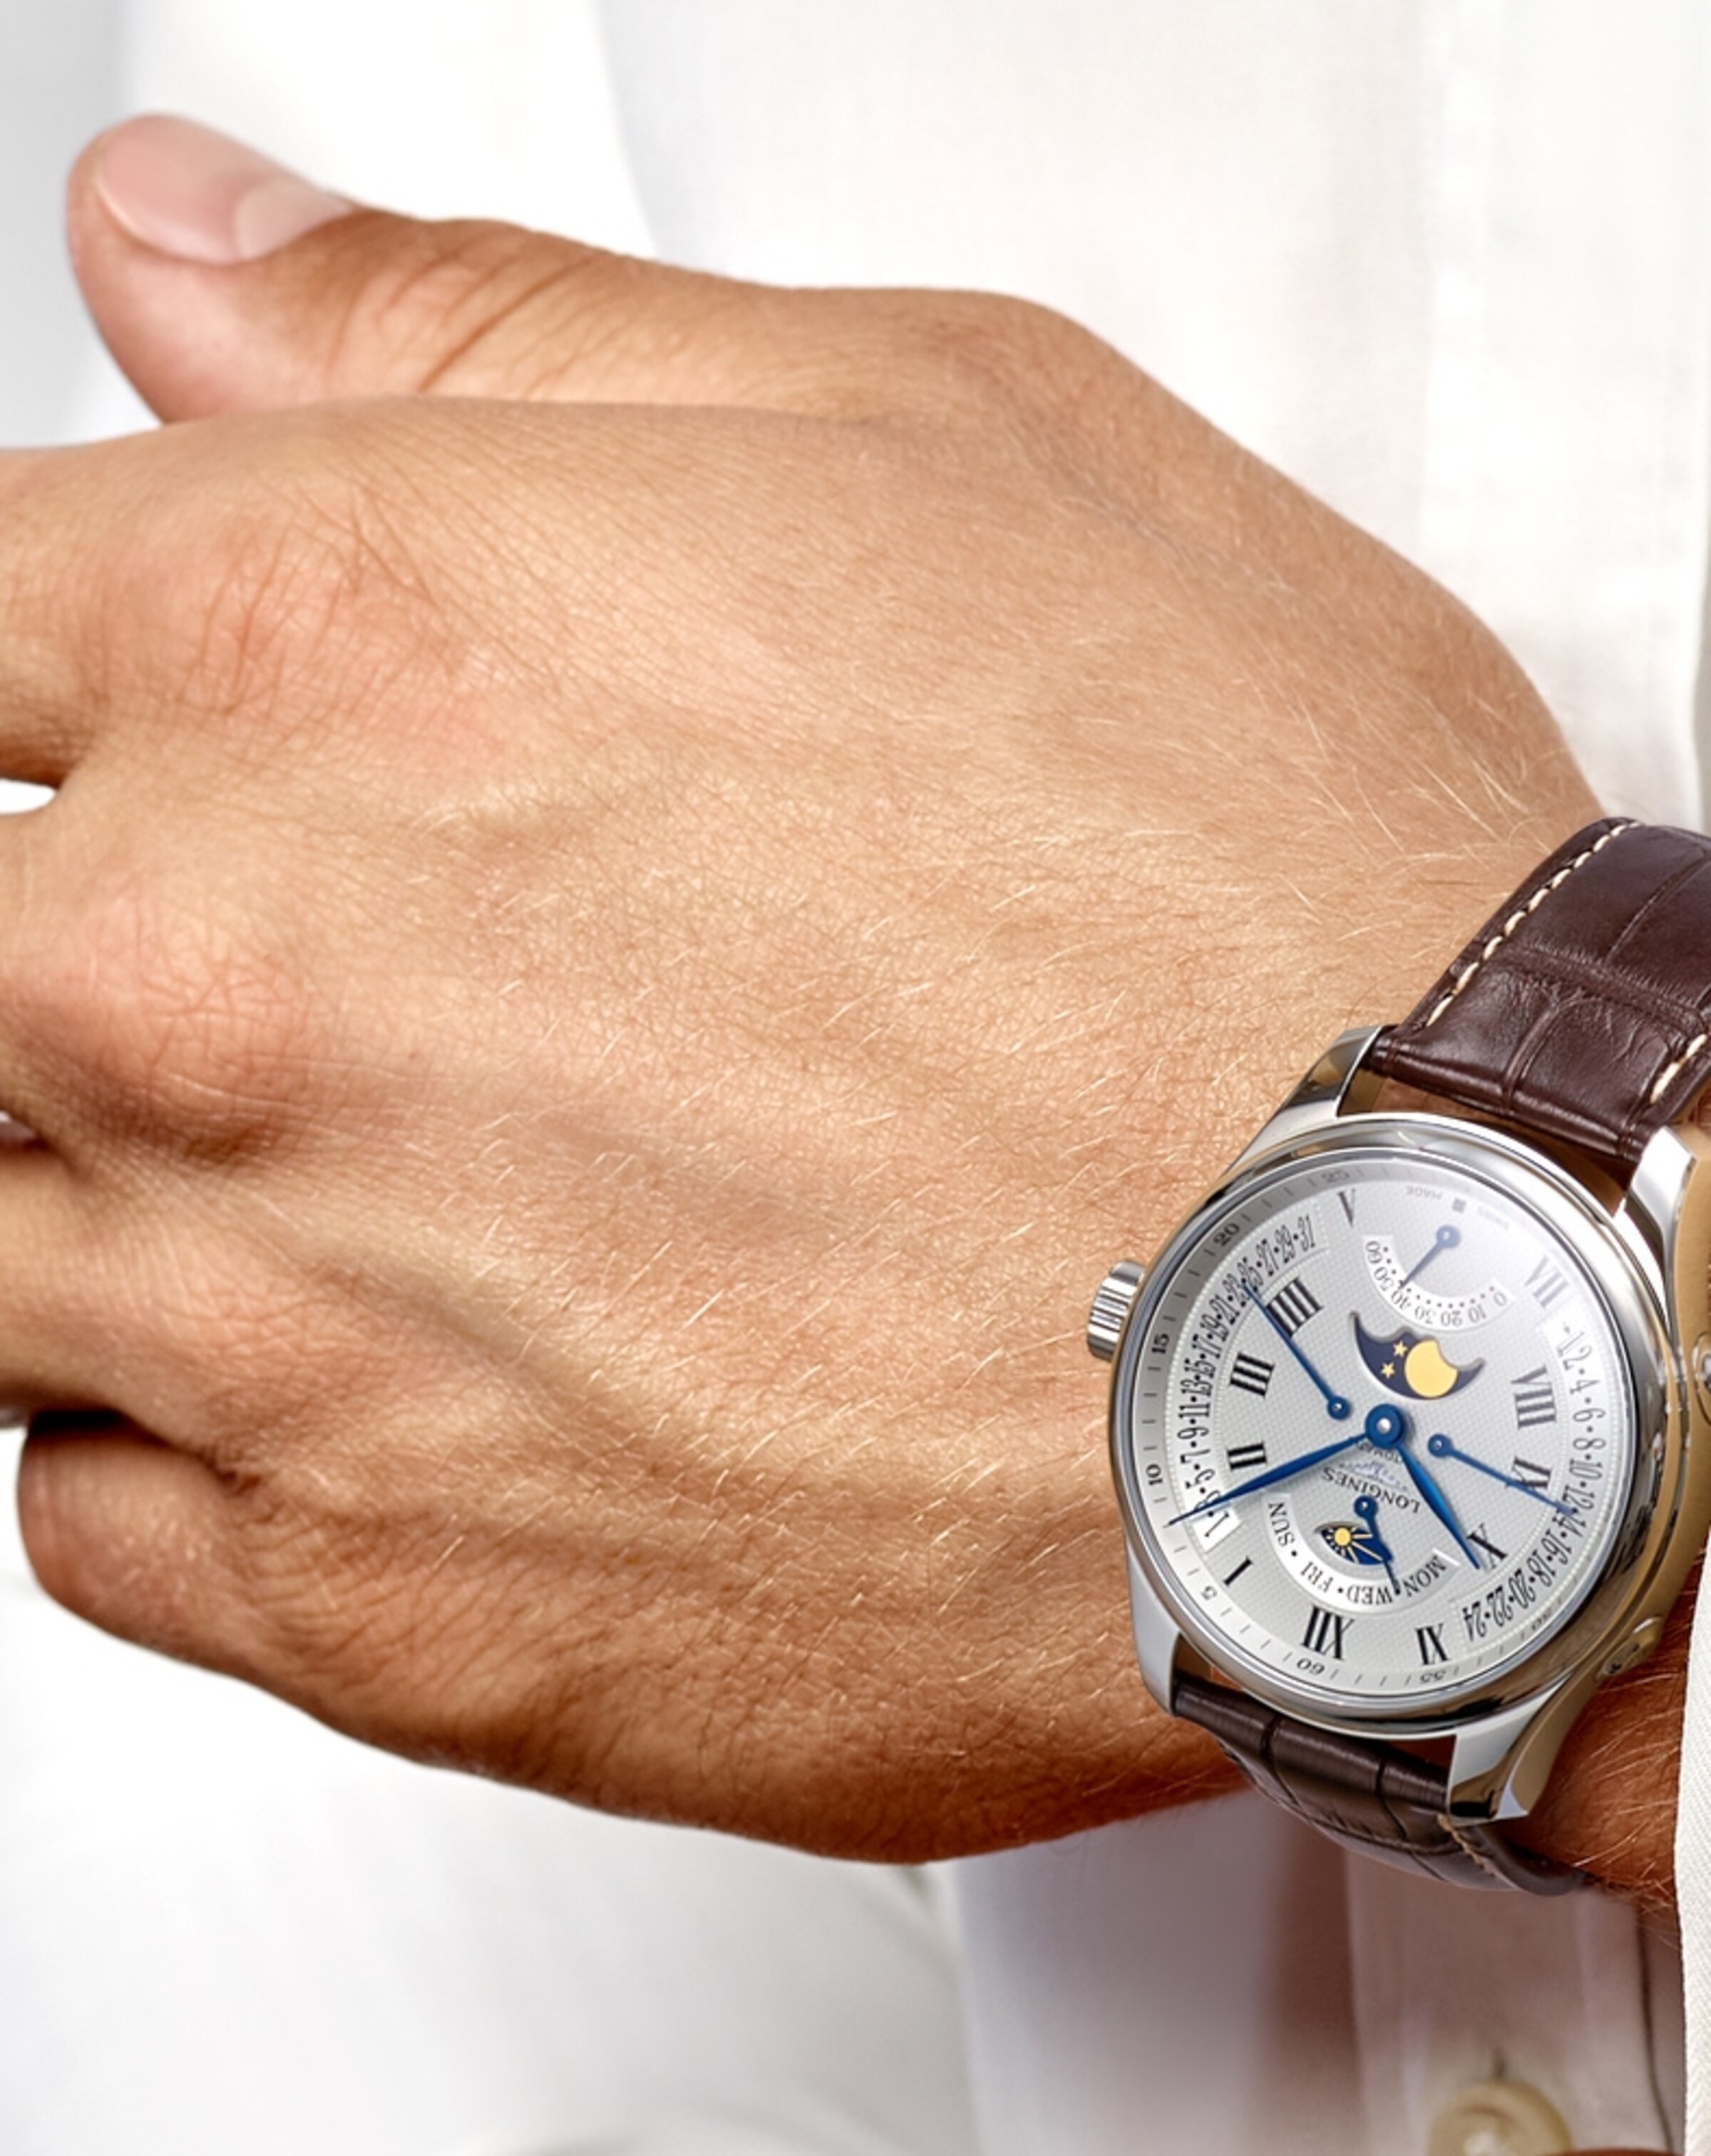 a Longines watch with Retrograde feature